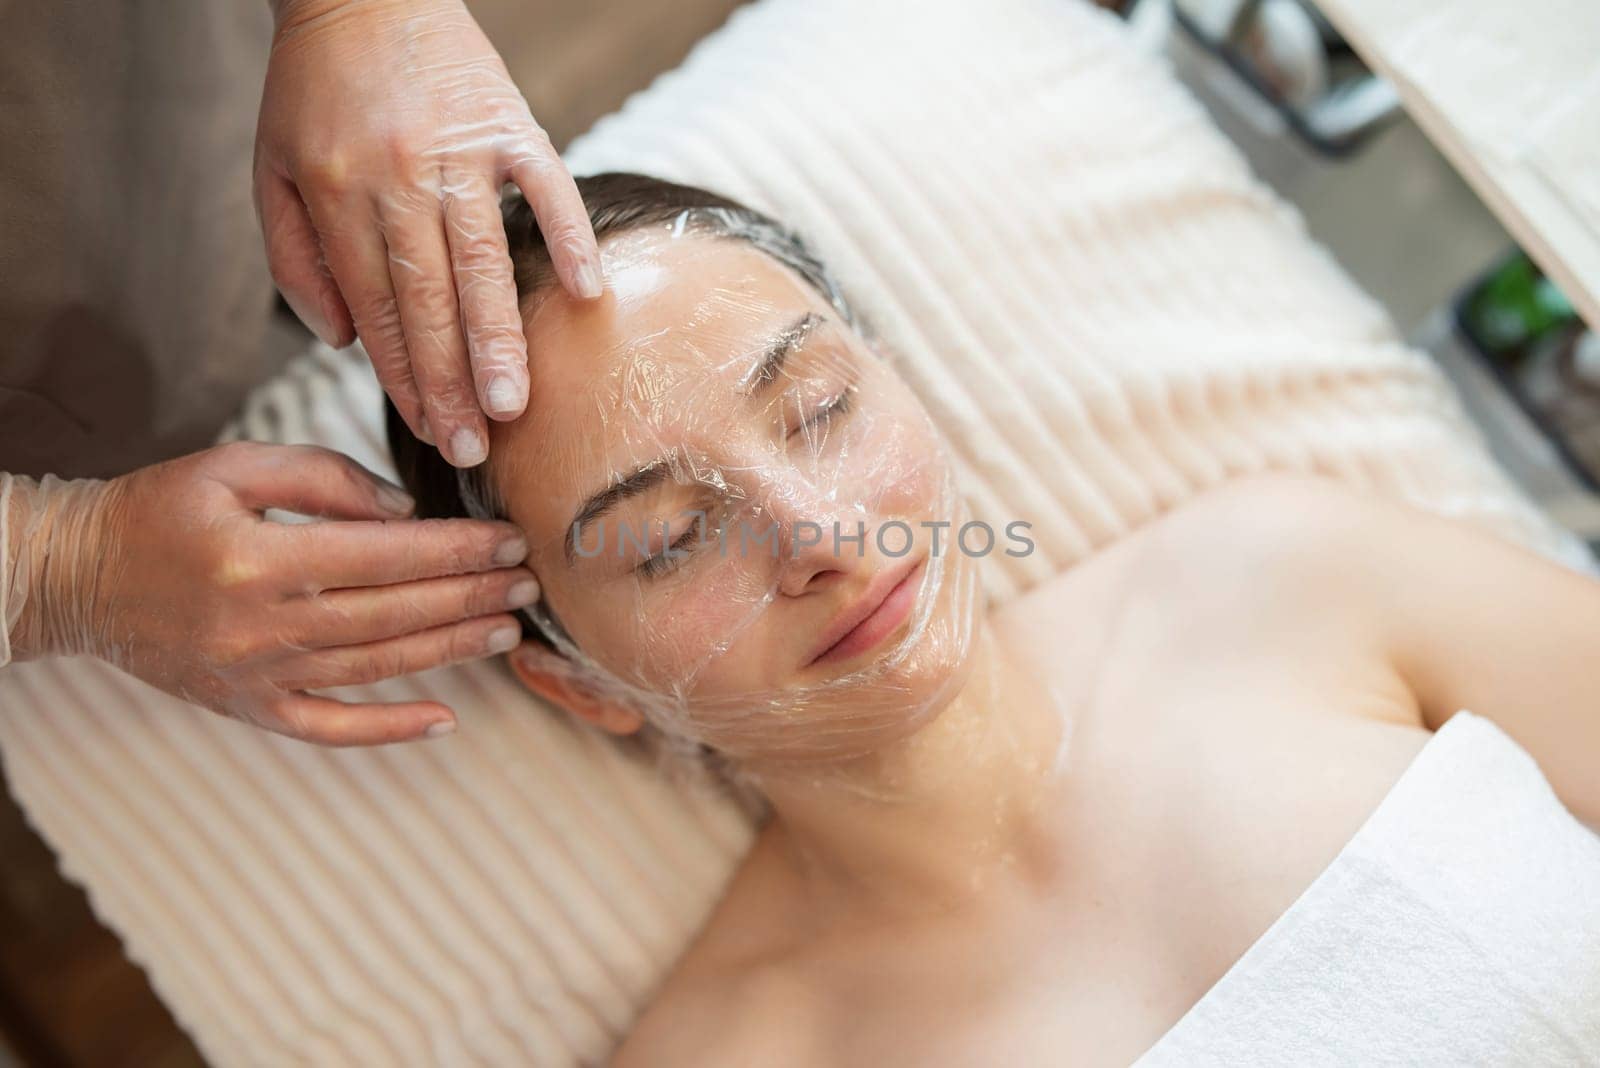 Cleaning of the face of a client in beauty salon